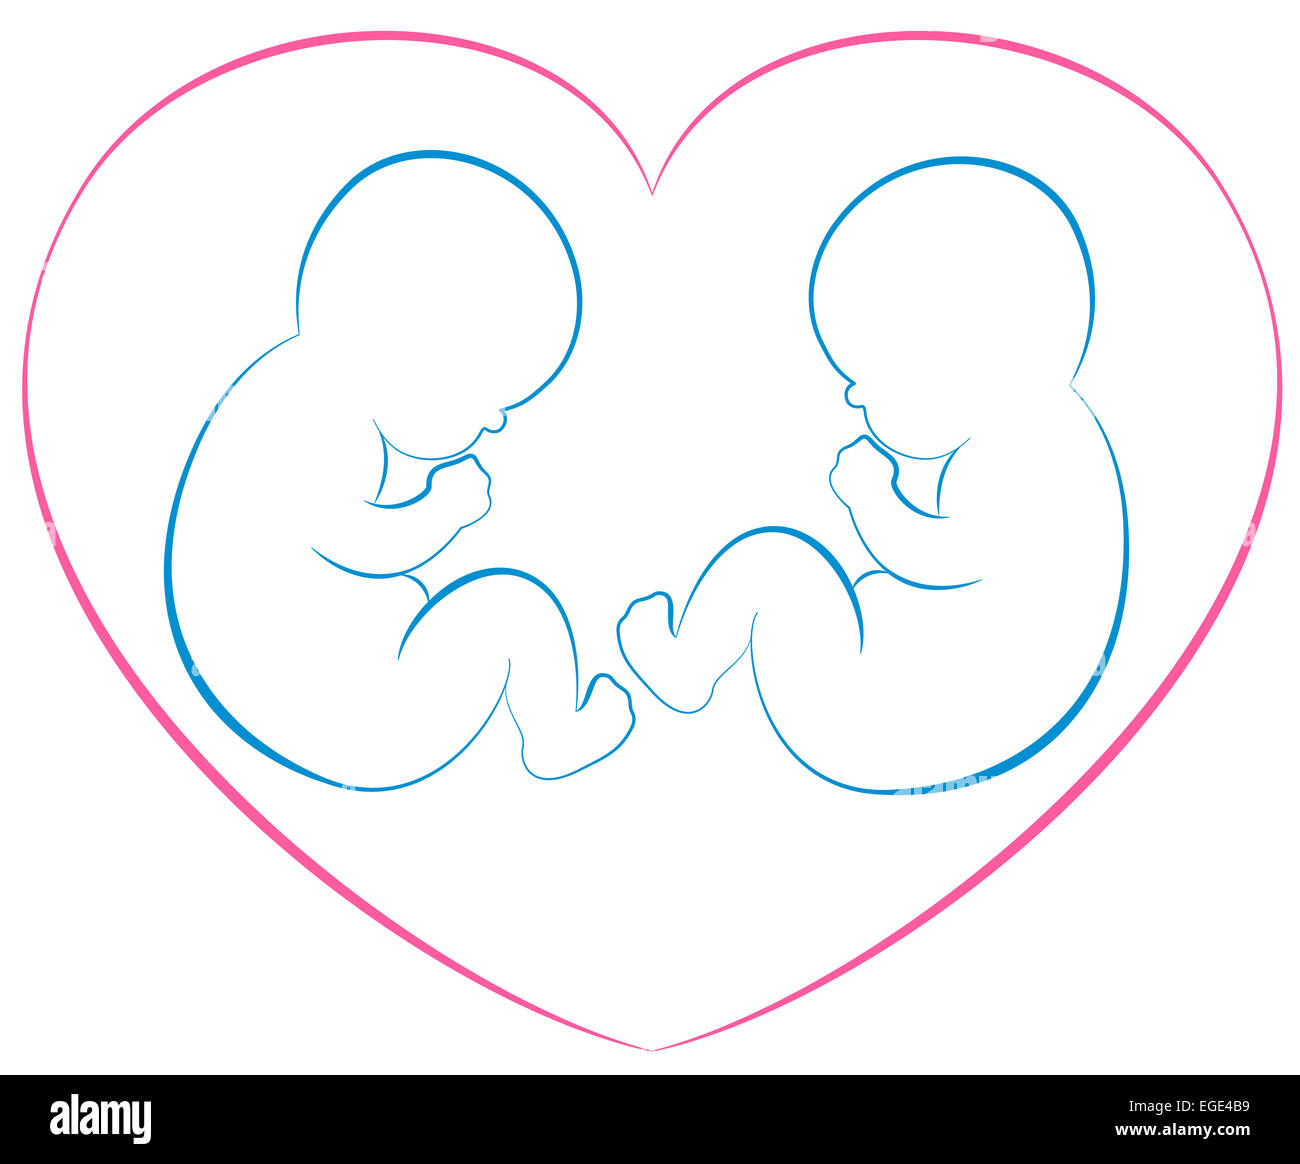 Outline illustration of two babies or twins with a pink heart around them. Stock Photo